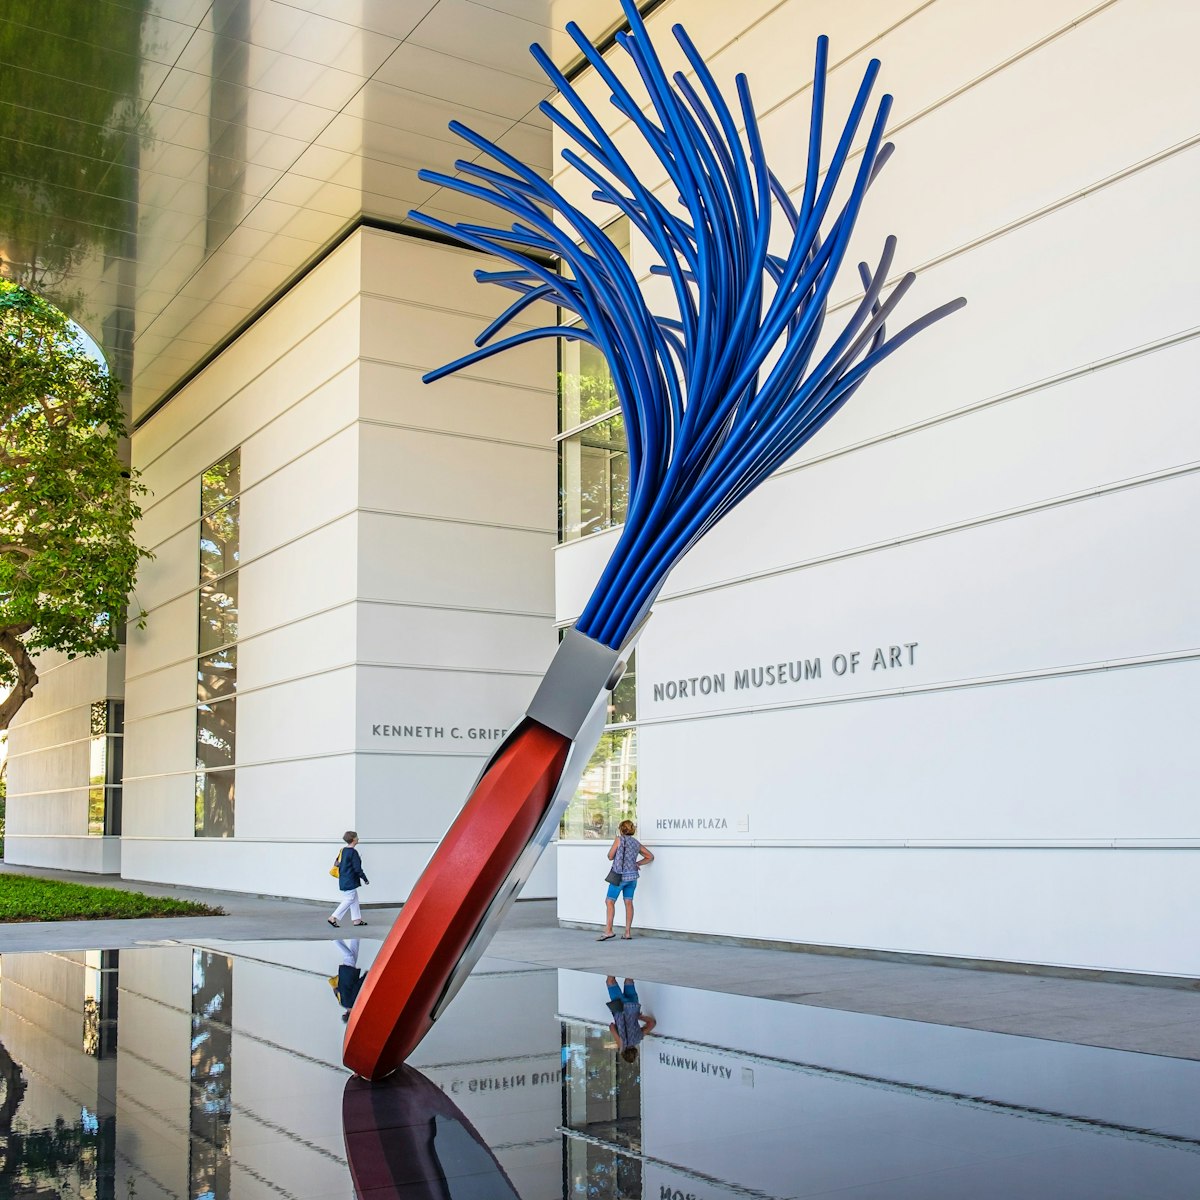 "Typewriter Eraser, Scale X" is an artwork created in 1999 by the American artist Claes Oldenburg in partnership with his wife, Coosje van Bruggen. It was on view at the Norton Museum of Art, West Palm Beach, Florida, from February through June, 2019.